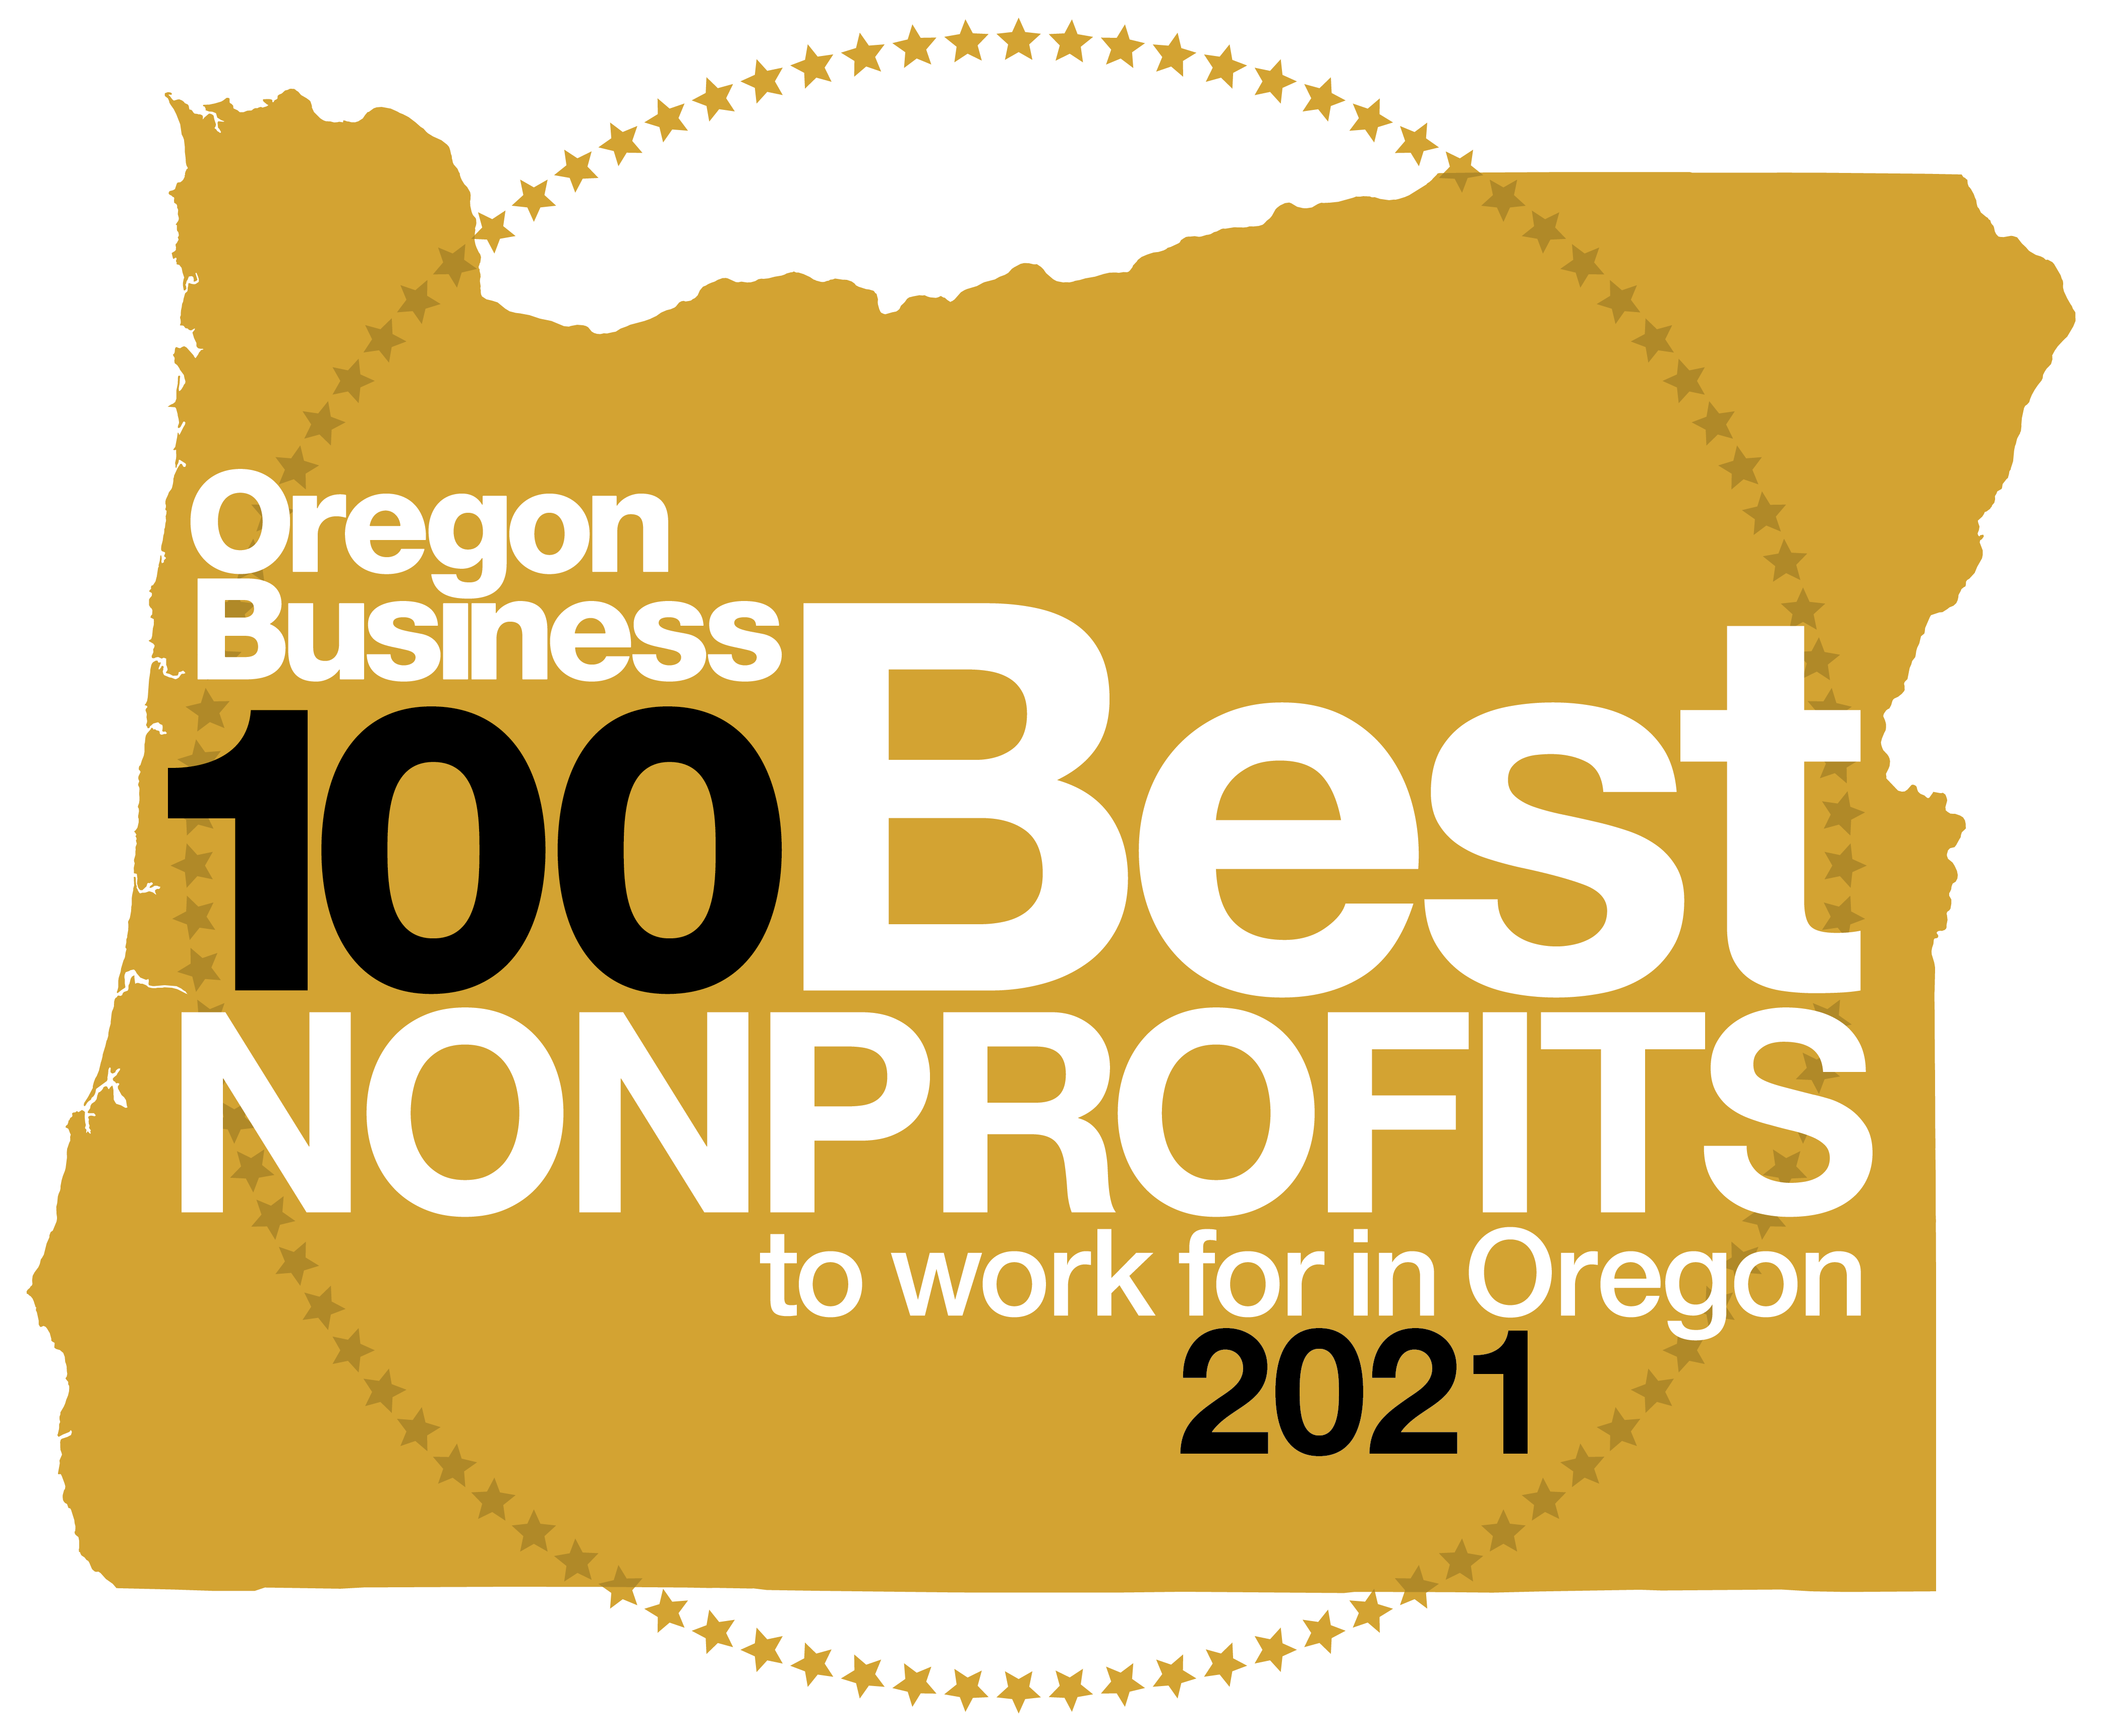 Graphic of Oregon showing the 100 Best Nonprofits to work for in Oregon 2021